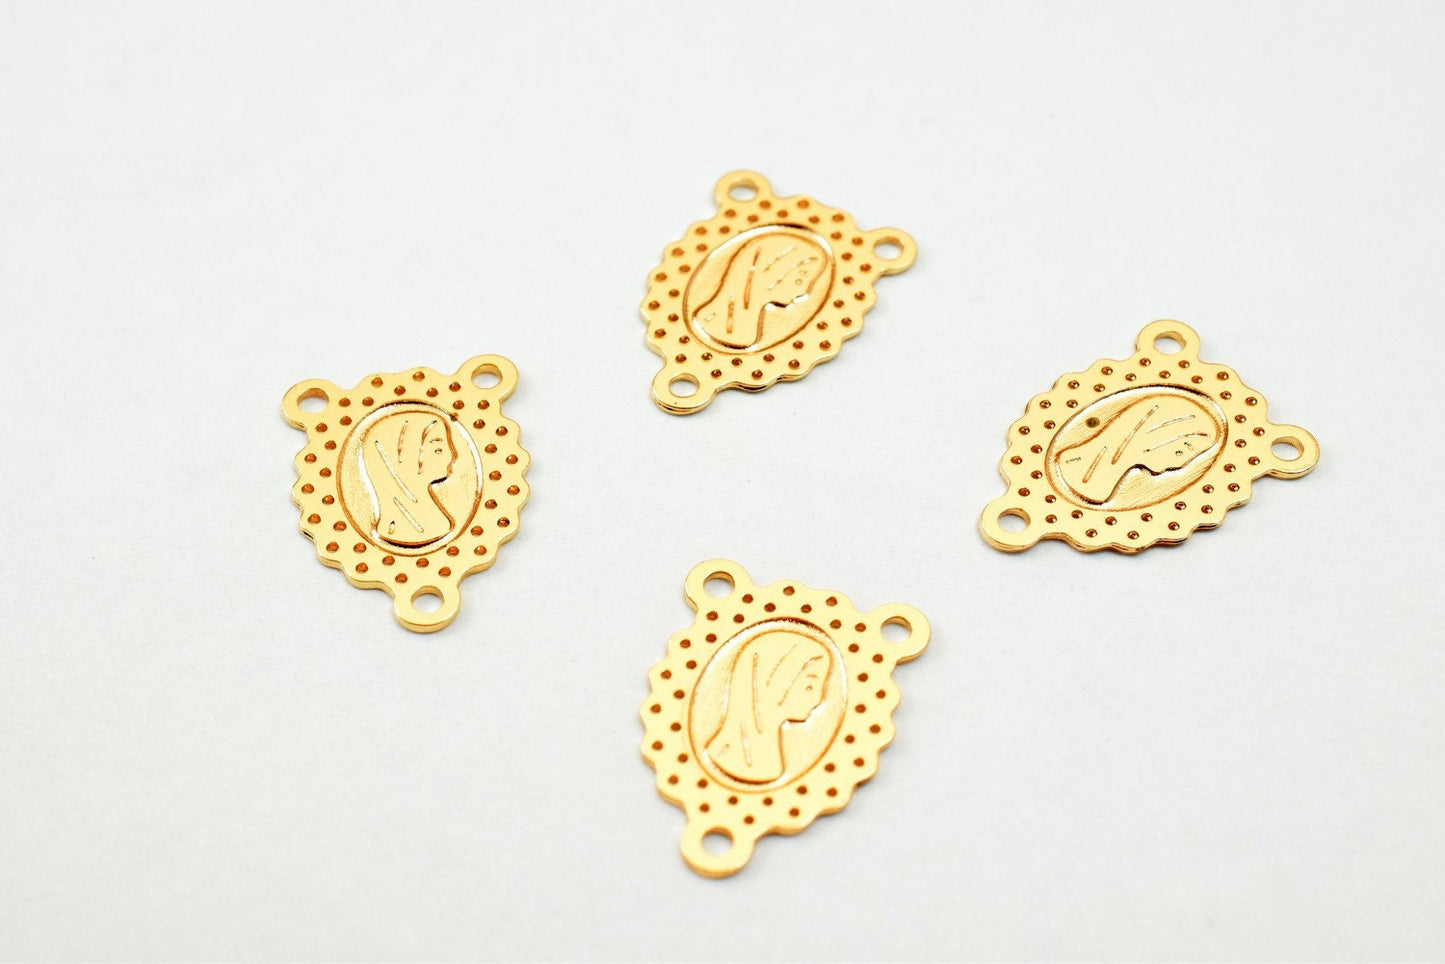 6PC Dainty Thin 18K Pinky Gold Filled Filigree Saint Mary Center Of Rossery Connector Size 15x10mm Thickness 0.25mm For Jewelry Making DGF12